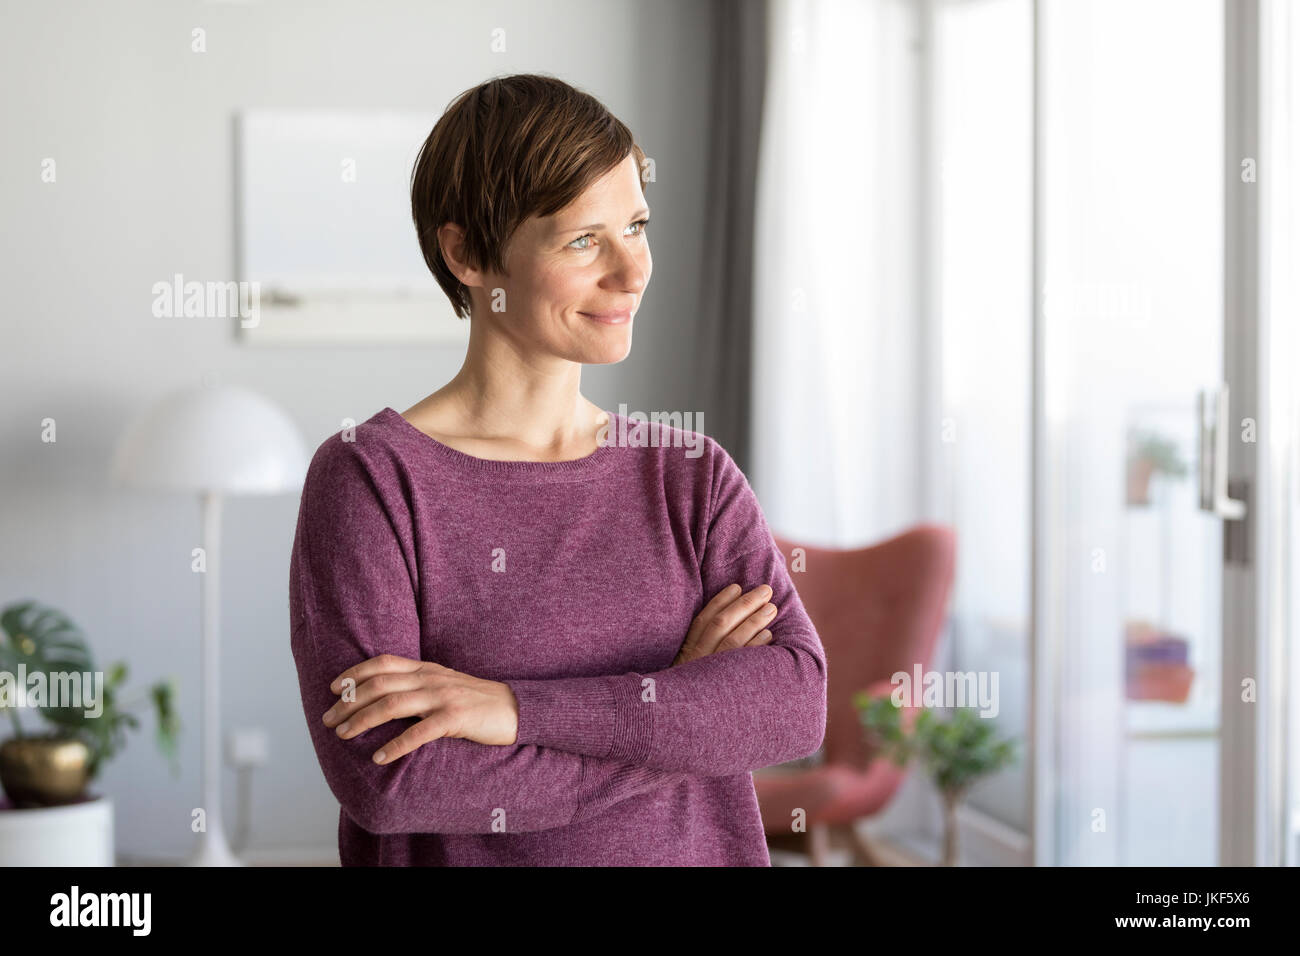 Portrait of smiling woman at home Banque D'Images